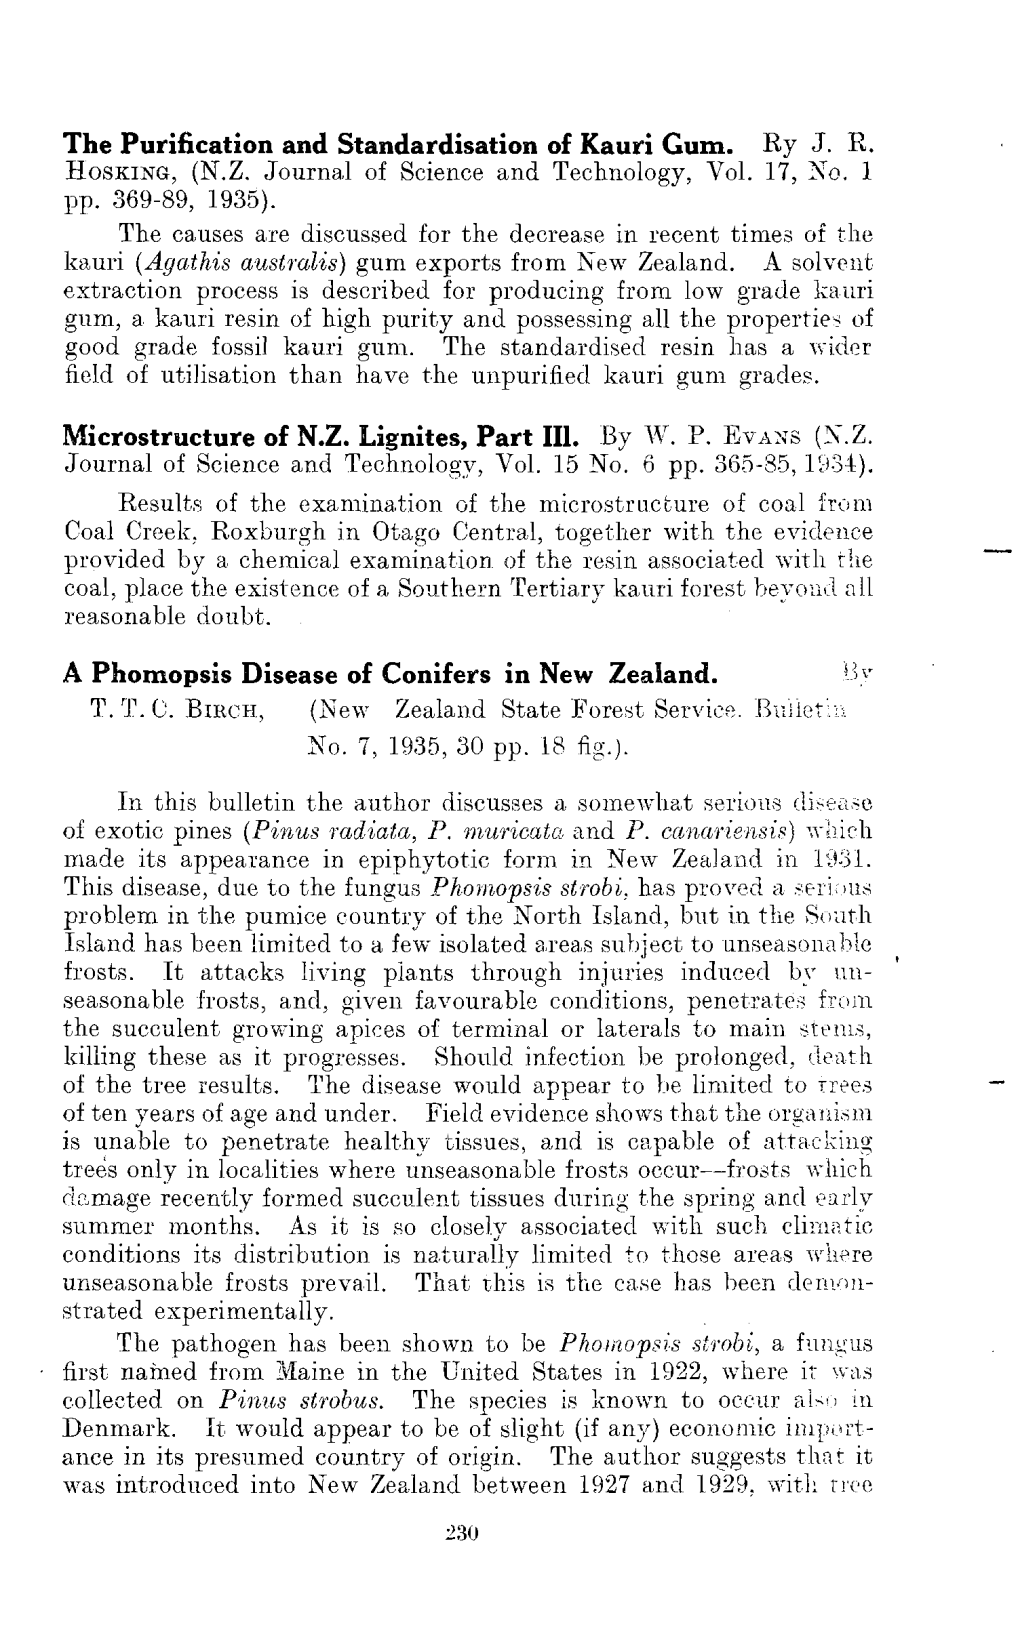 The Purification and Standardisation of Kauri Gum. Ry J. R. HOSKING, (N.Z